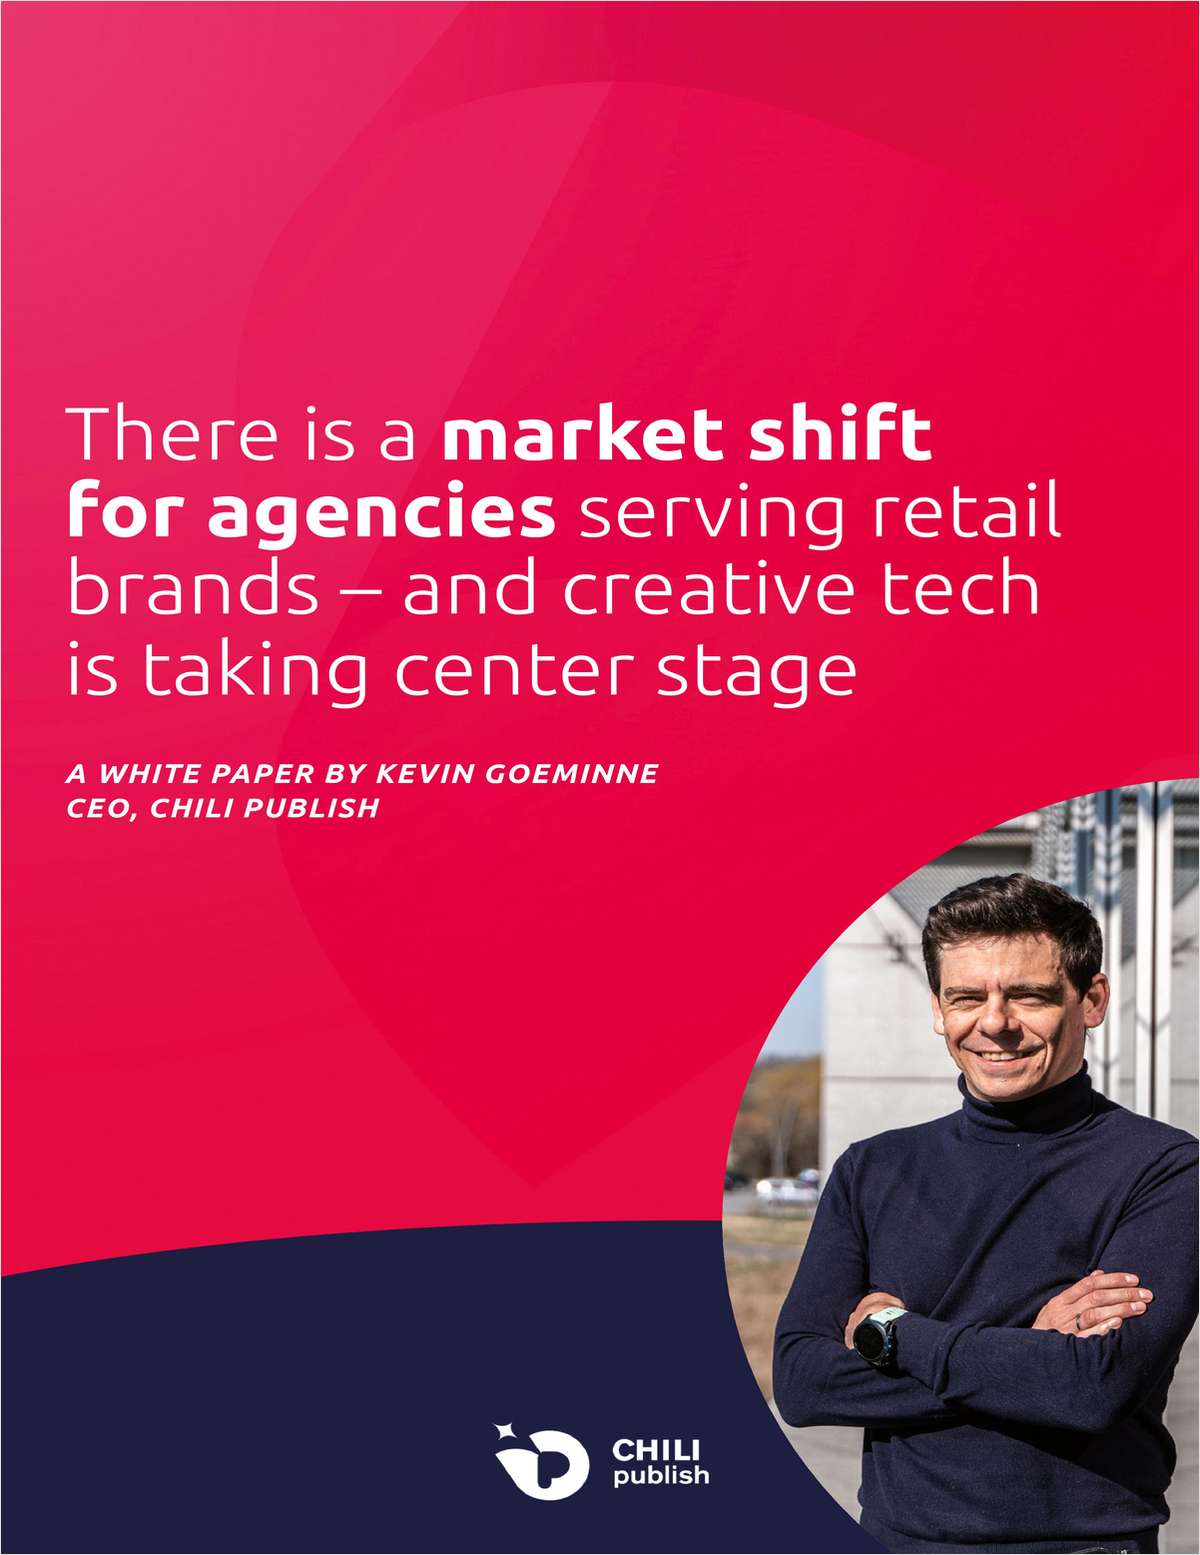 The market shift for agencies serving retail brands